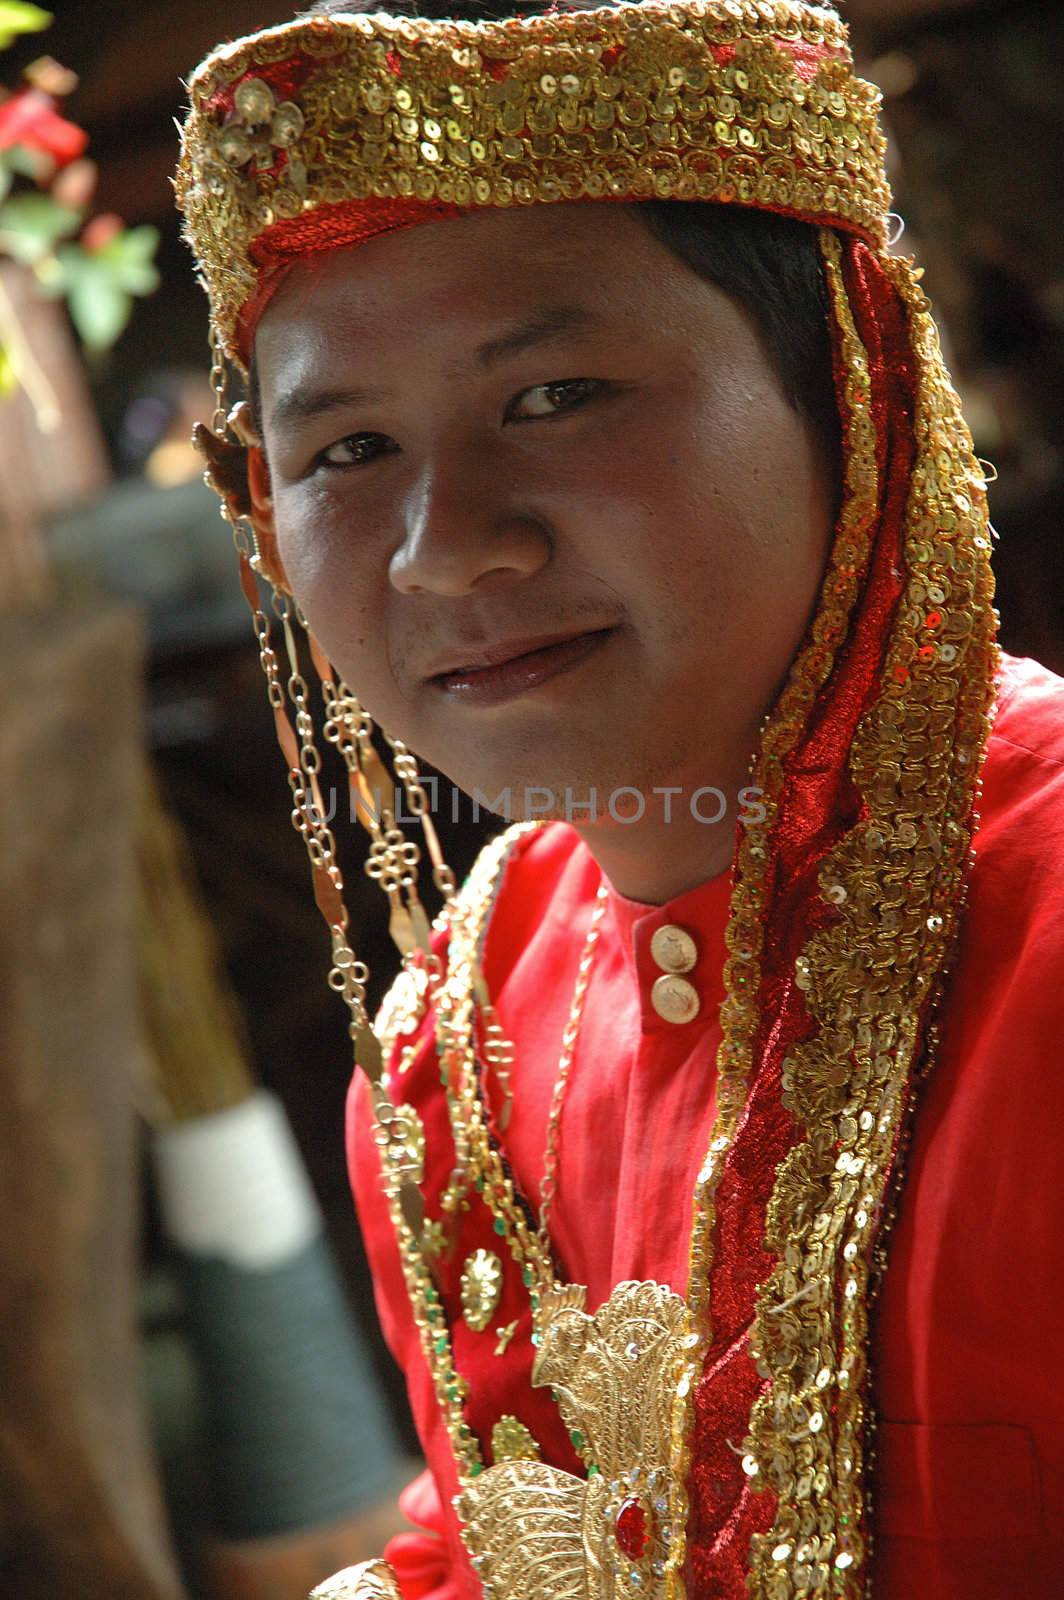 young asian groom wearing traditional costume from makasar-indonesia